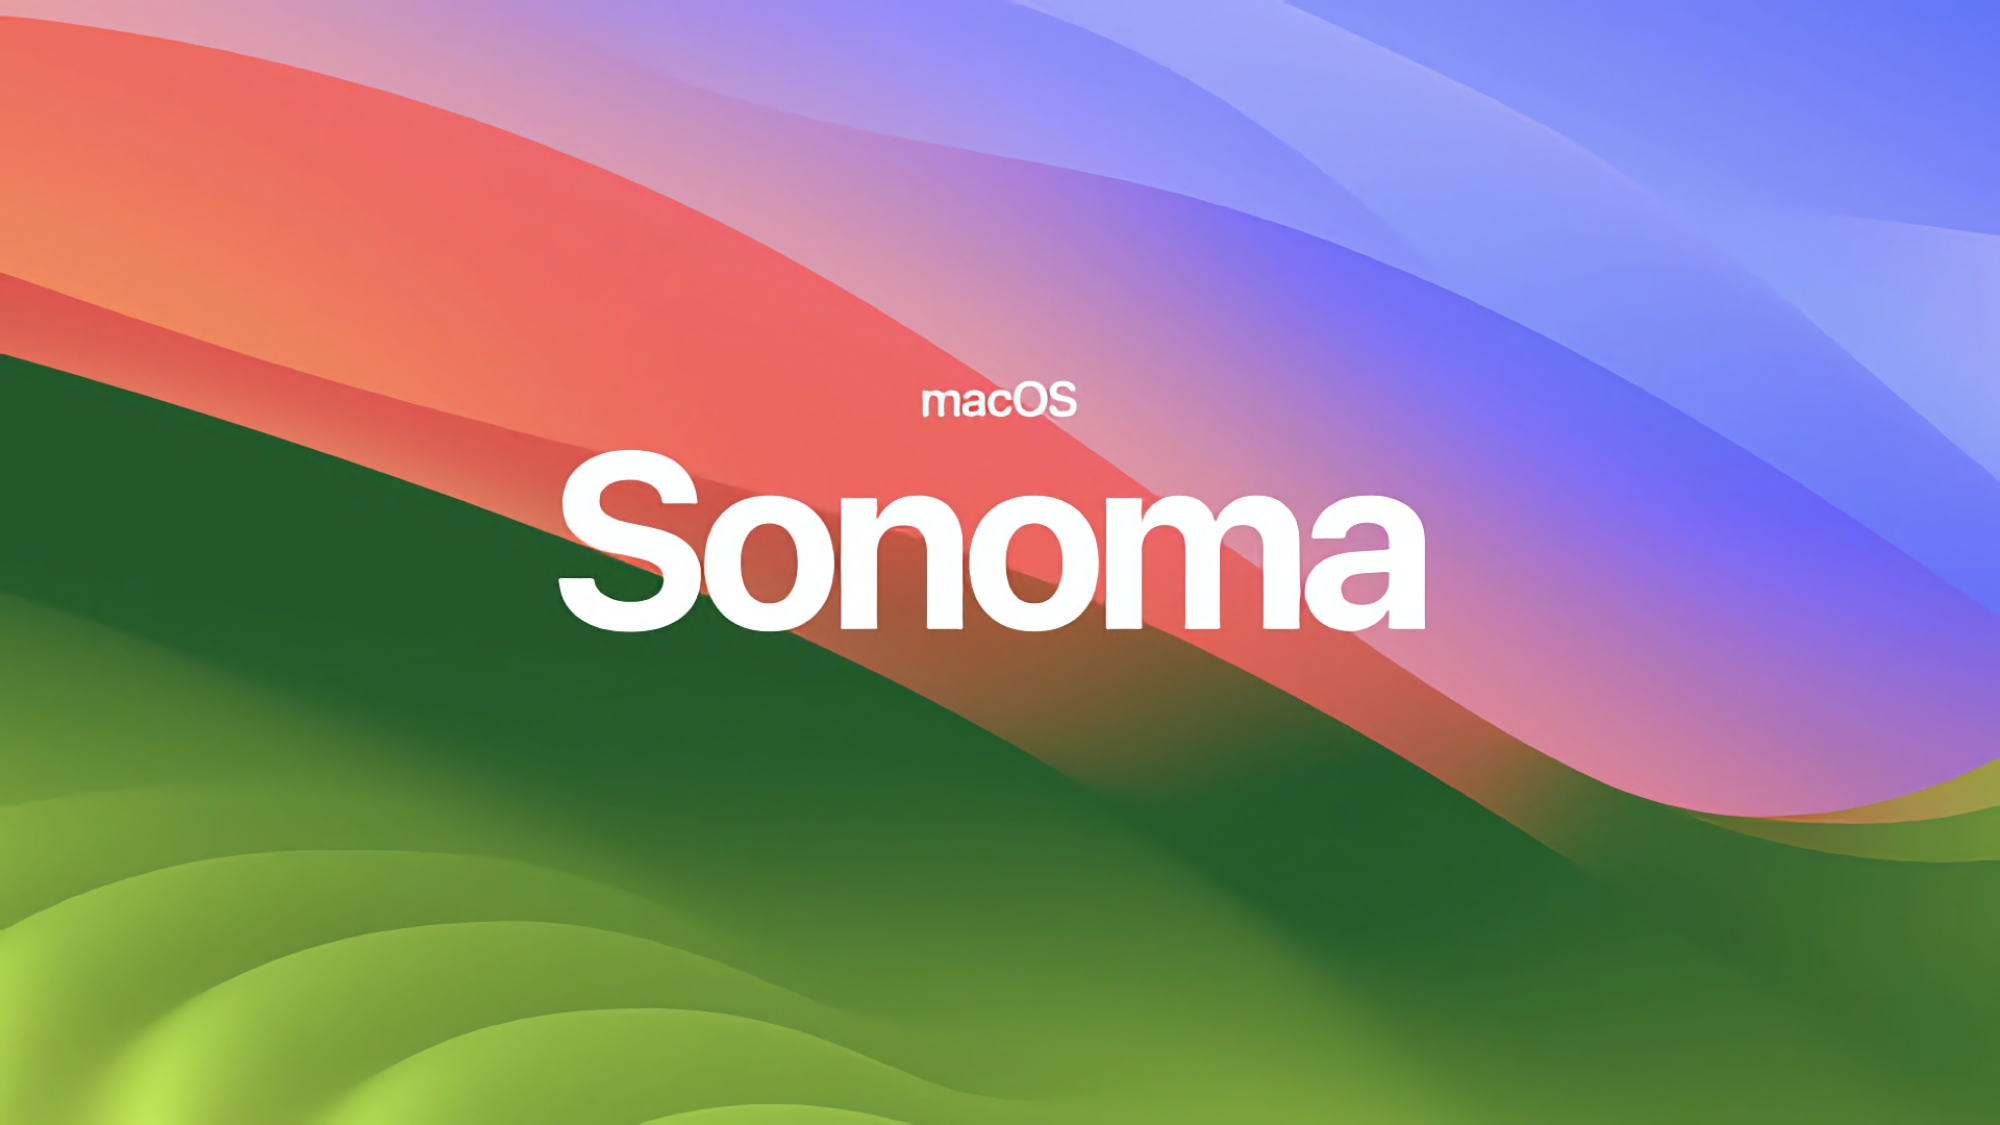 Bug fixes: Apple has released macOS Sonoma 14.1.1